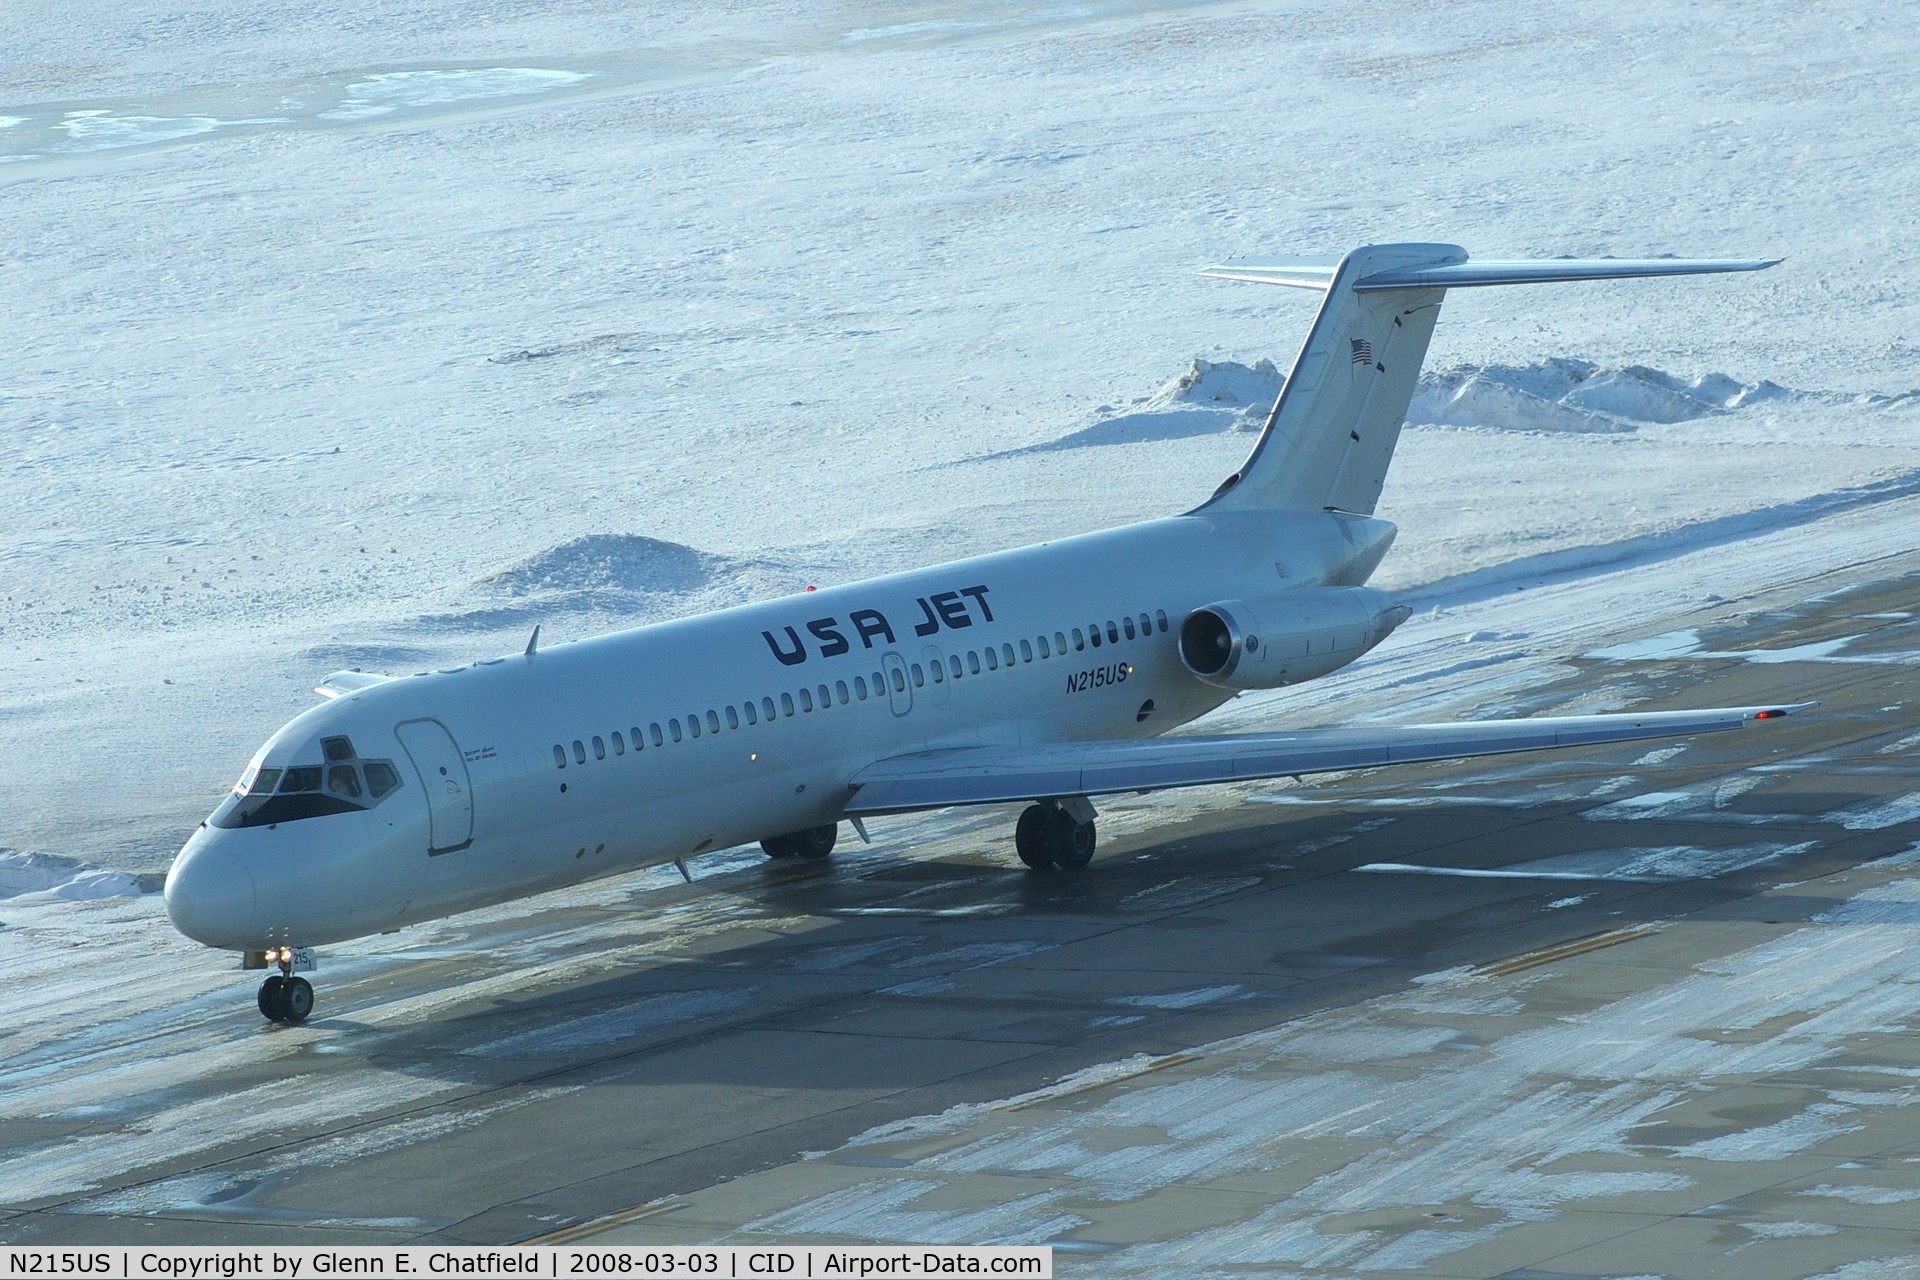 N215US, 1970 Douglas DC-9-32 C/N 47480, Jet USA taxiing to park below the tower